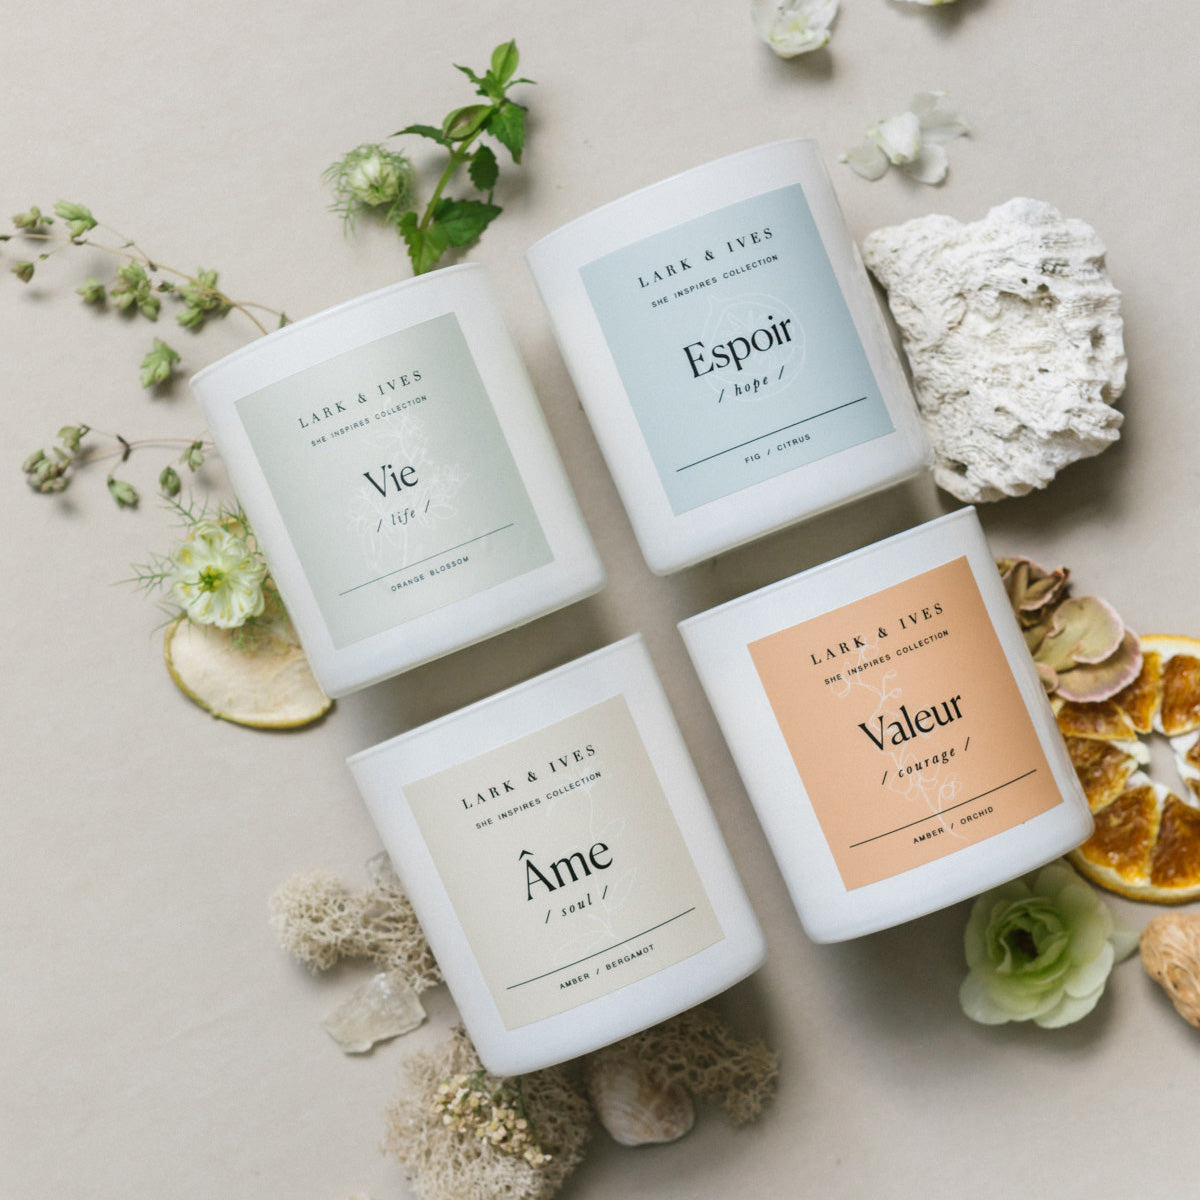 Lark and Ives / Candle / Soy Candle / Essential Oil Candle / Cruelty Free / Fair Trade / Ethical Goods / Set of four candles / Gift Guide / Gift Ideas